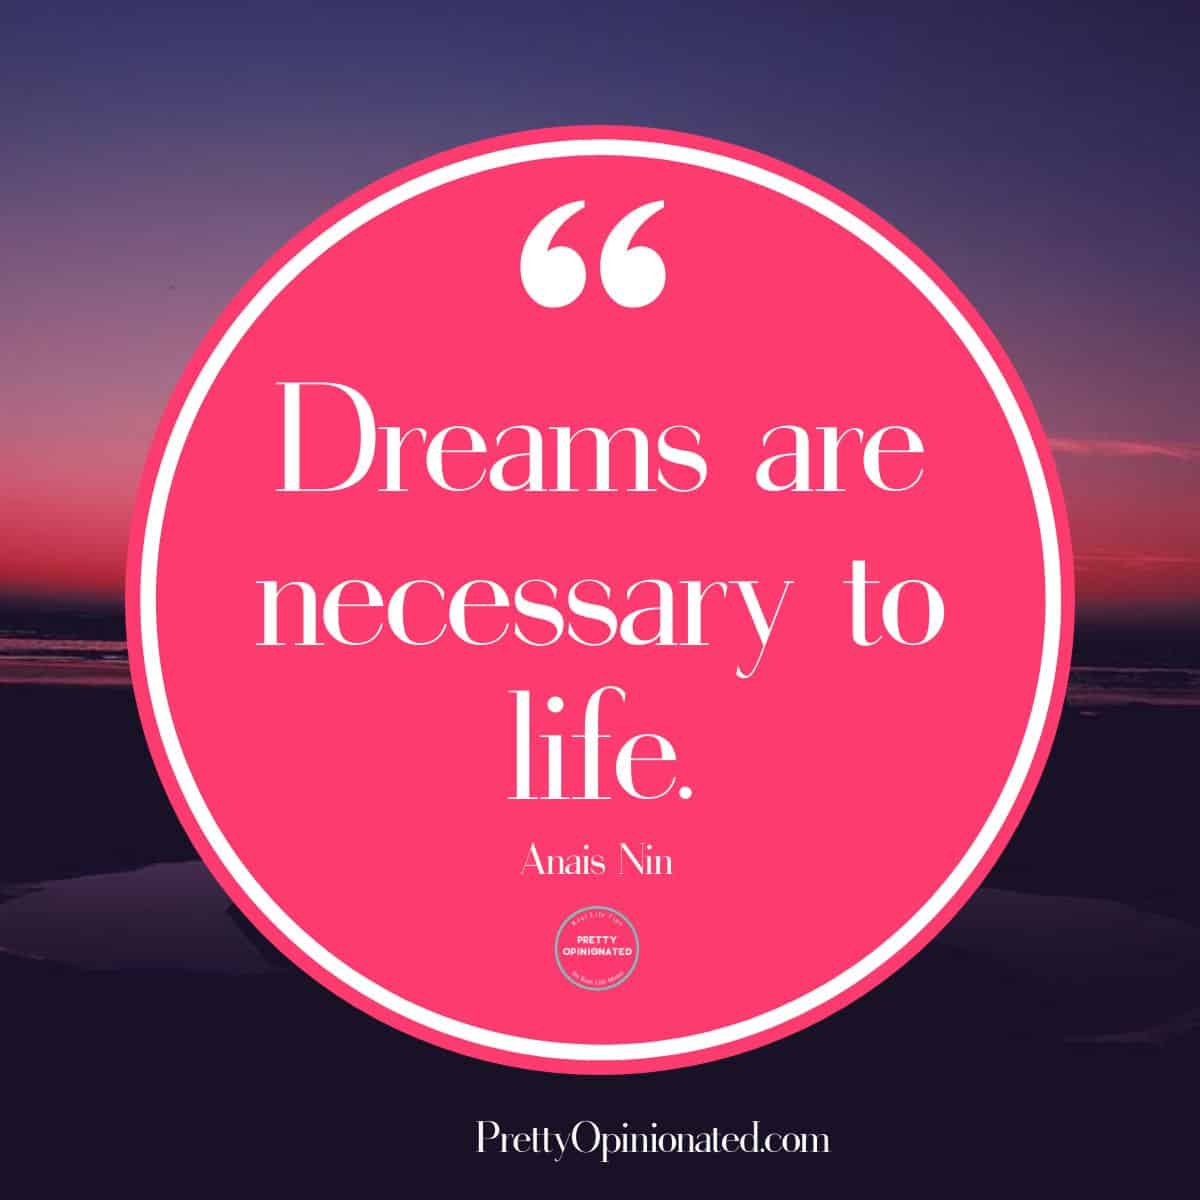 25 Quotes About Dreams That Will Inspire You to Follow Yours